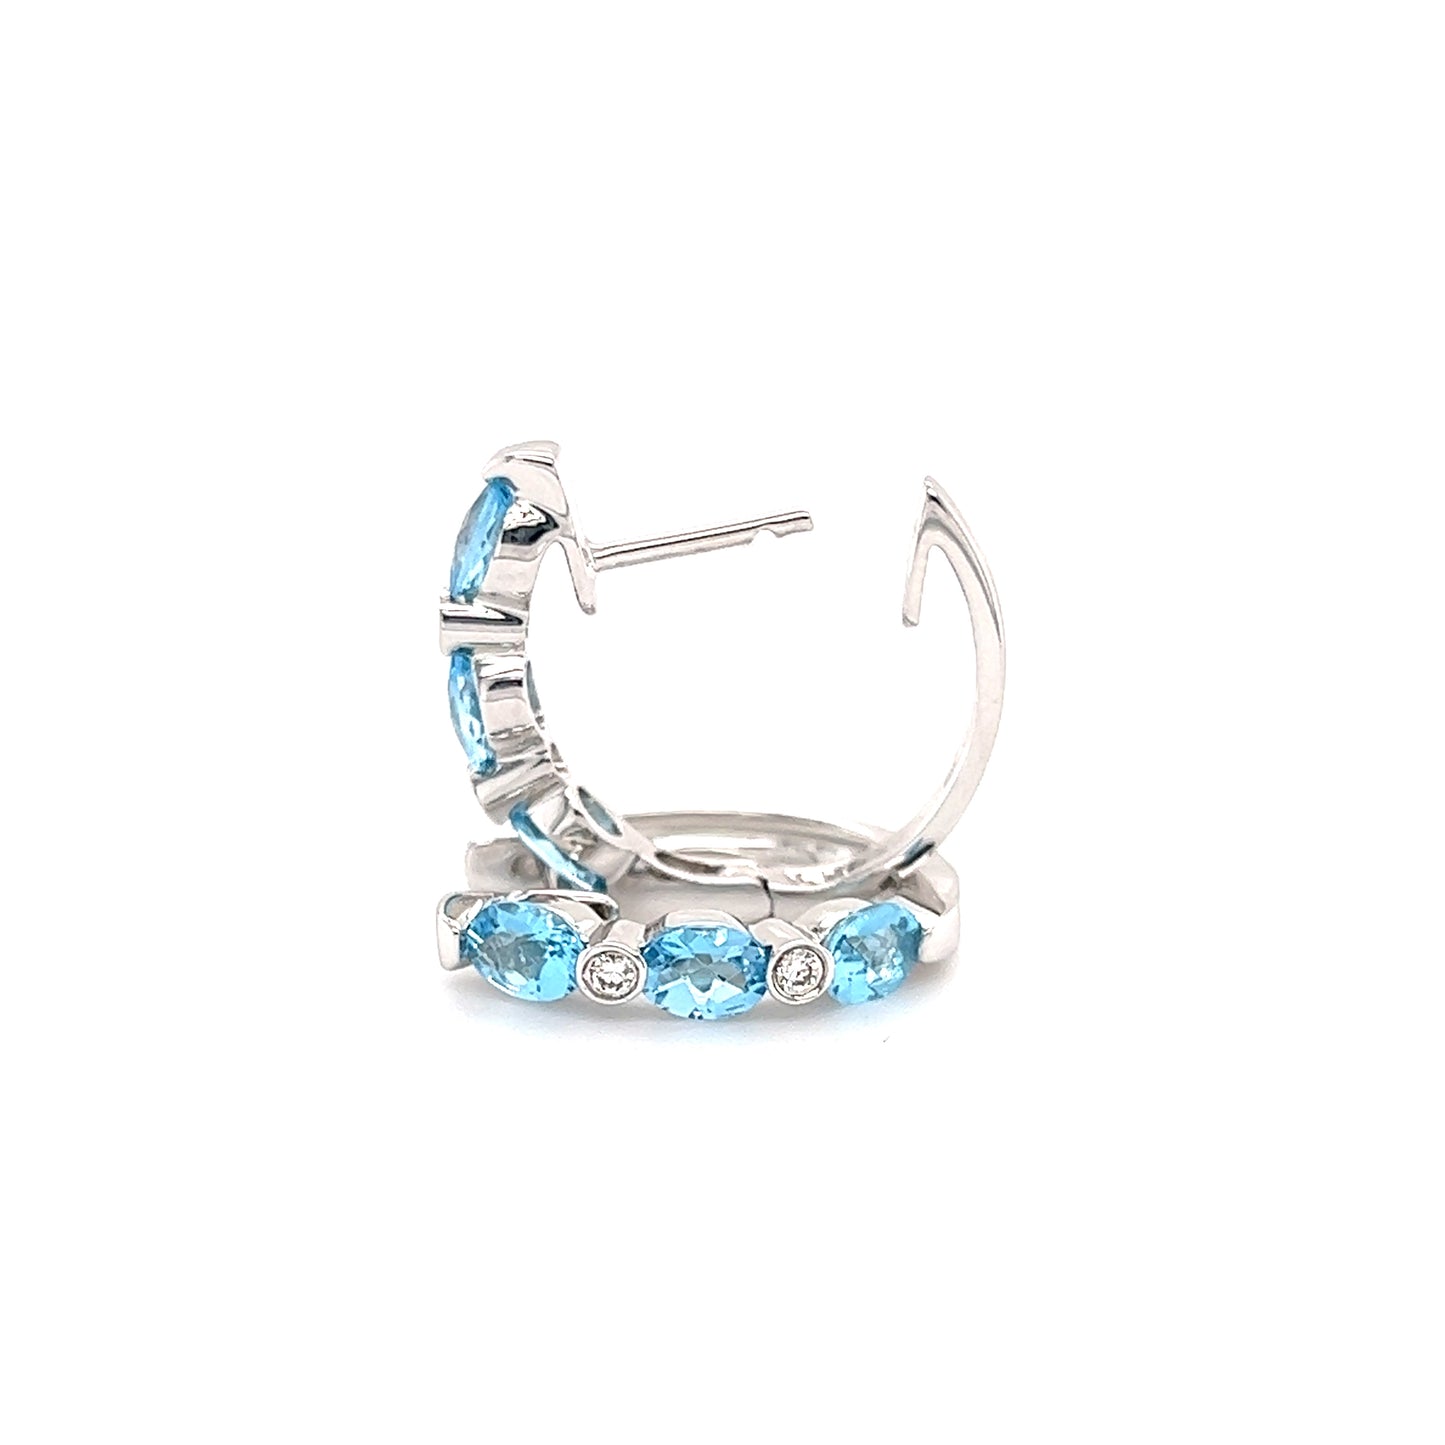 Aquamarine Hoop Earrings with Four Diamonds in 14K White Gold Front and Side View With Open Clasp